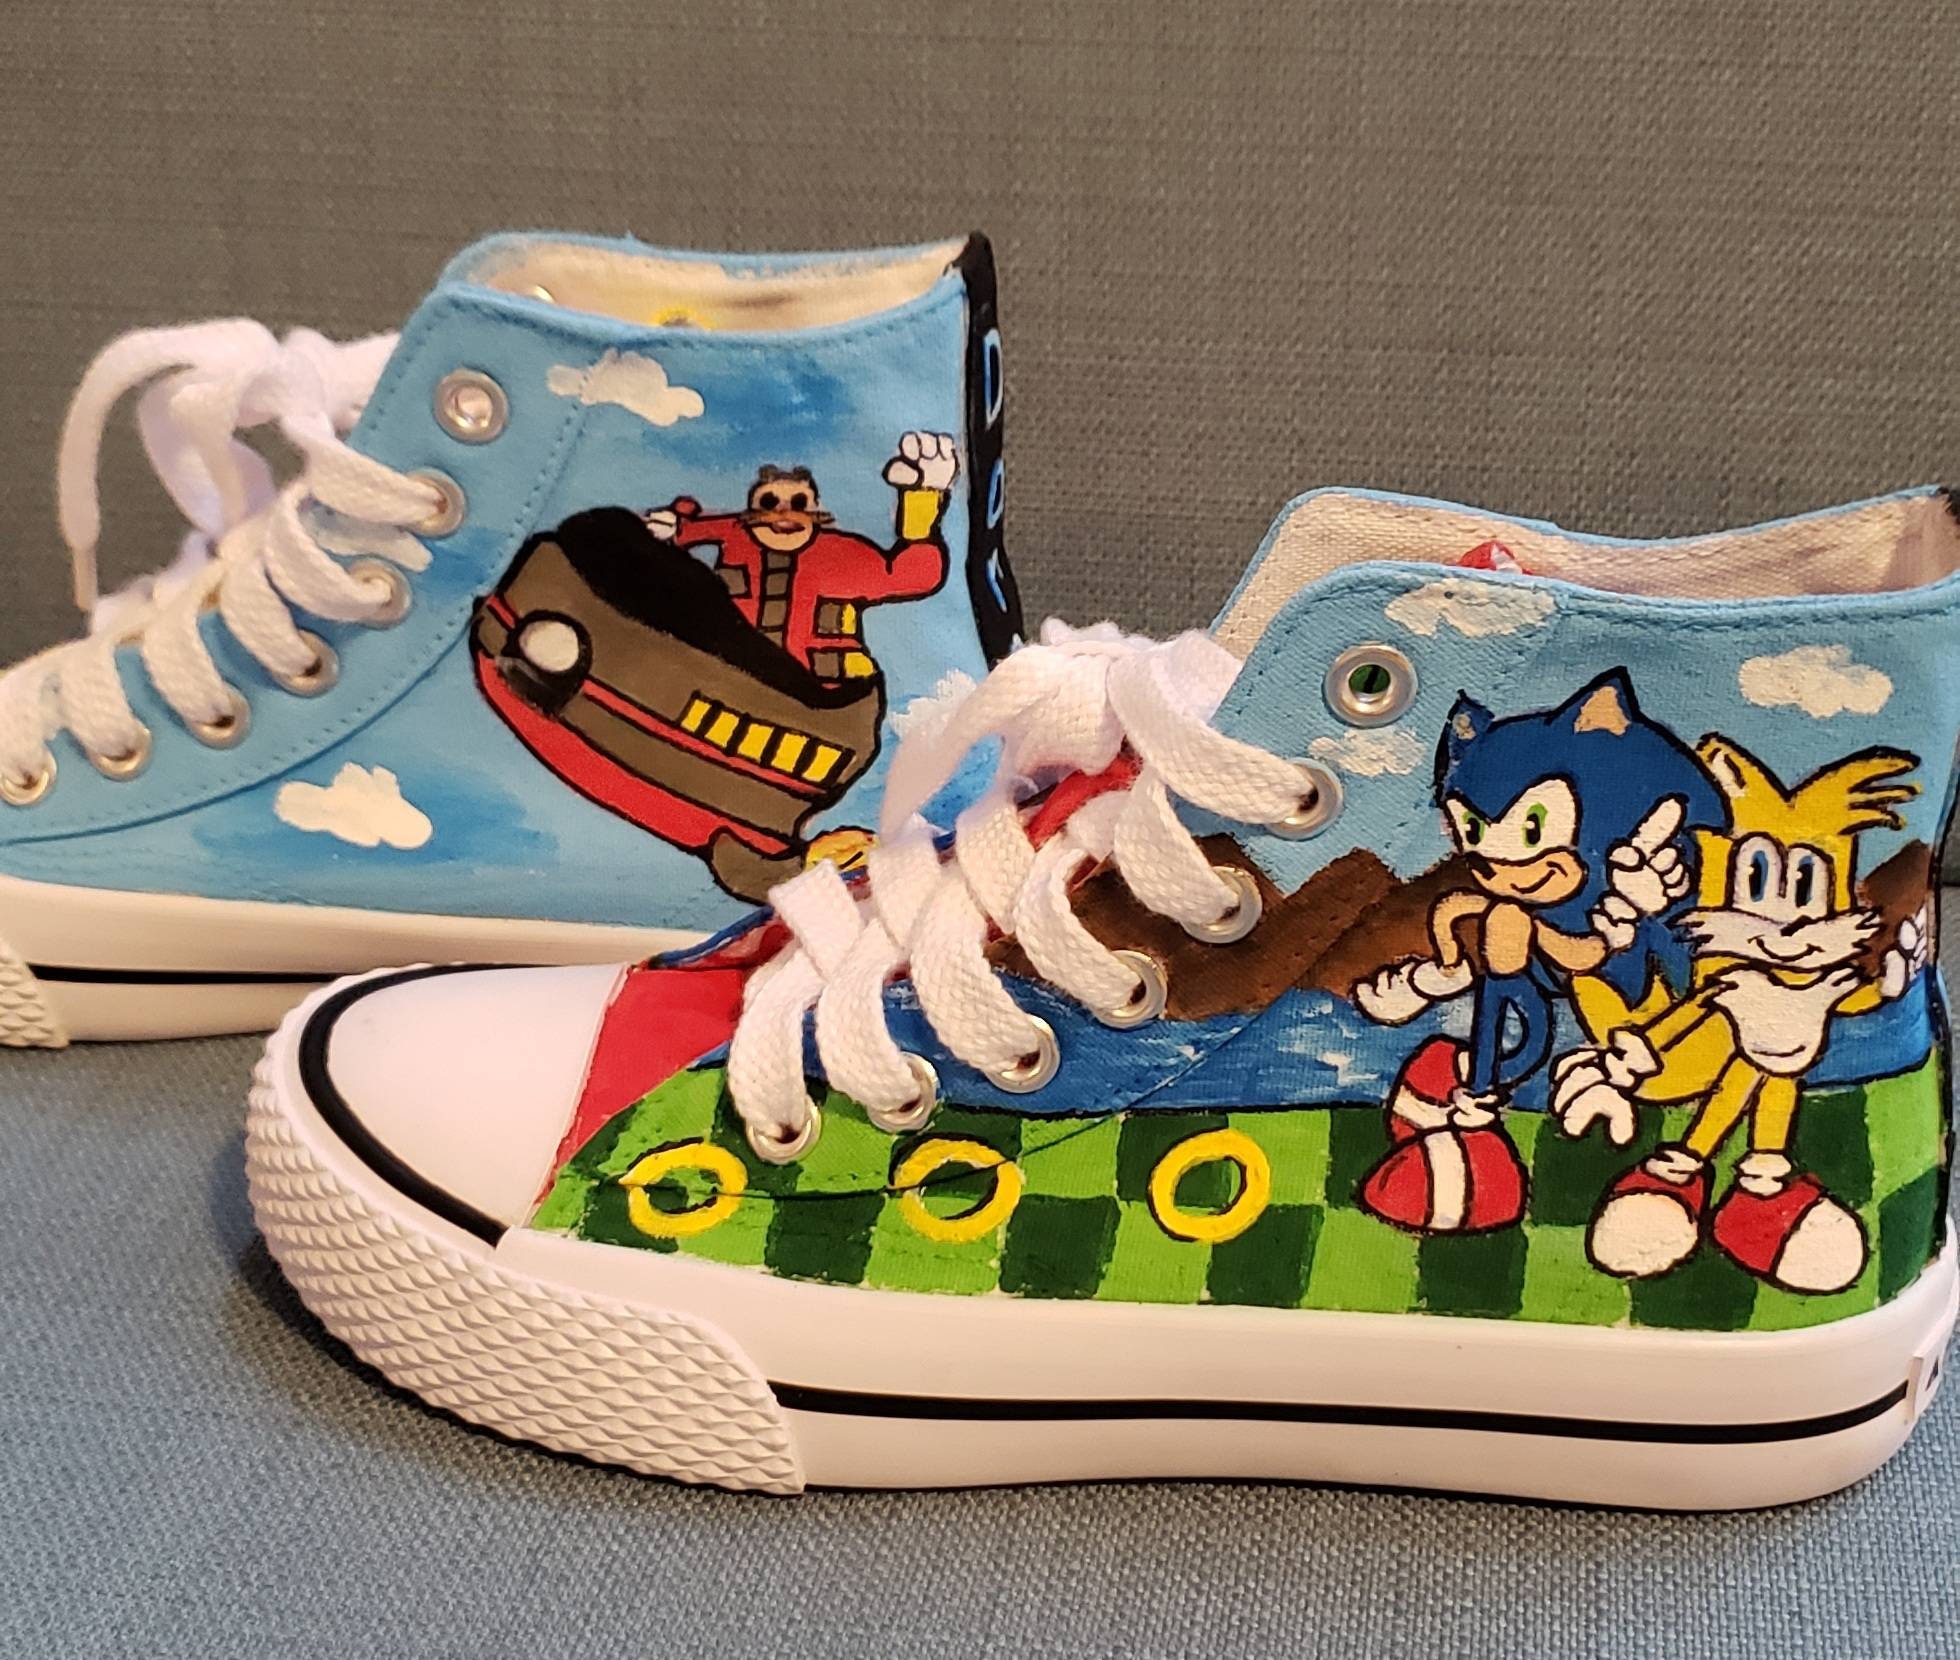 SparkleMe Shoes - Custom sonic and shadow hedgehog, t-shirt and shoe combo,  for birthday twin boys! SO COOL!☺️ Order YOURS today!󾮗🏽 All items are  made to order! Inbox for details! 󾔗󾔗󾔗